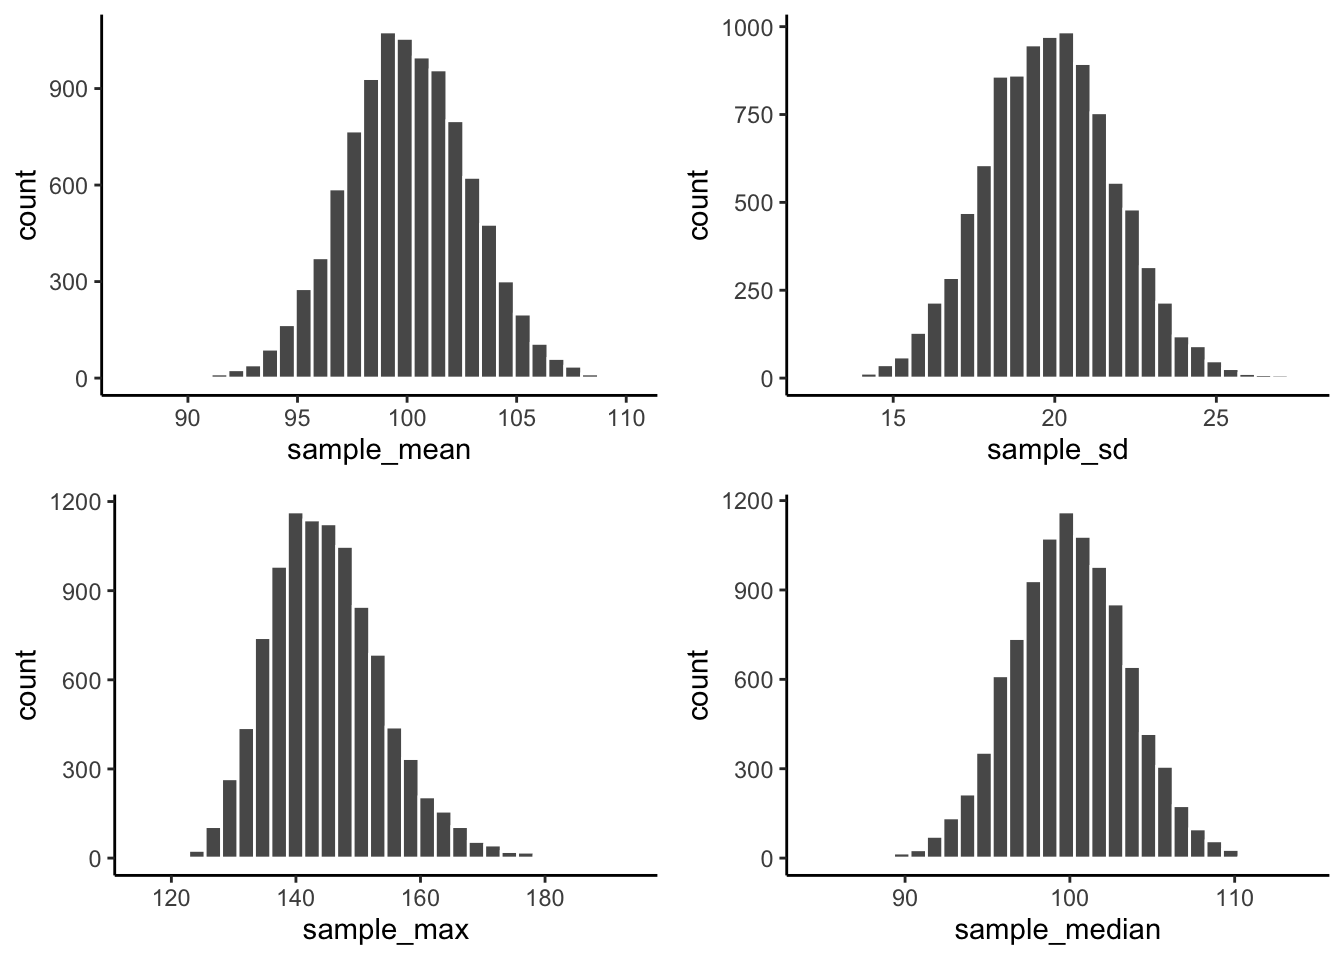 Each panel shows a histogram of a different sampling statistic